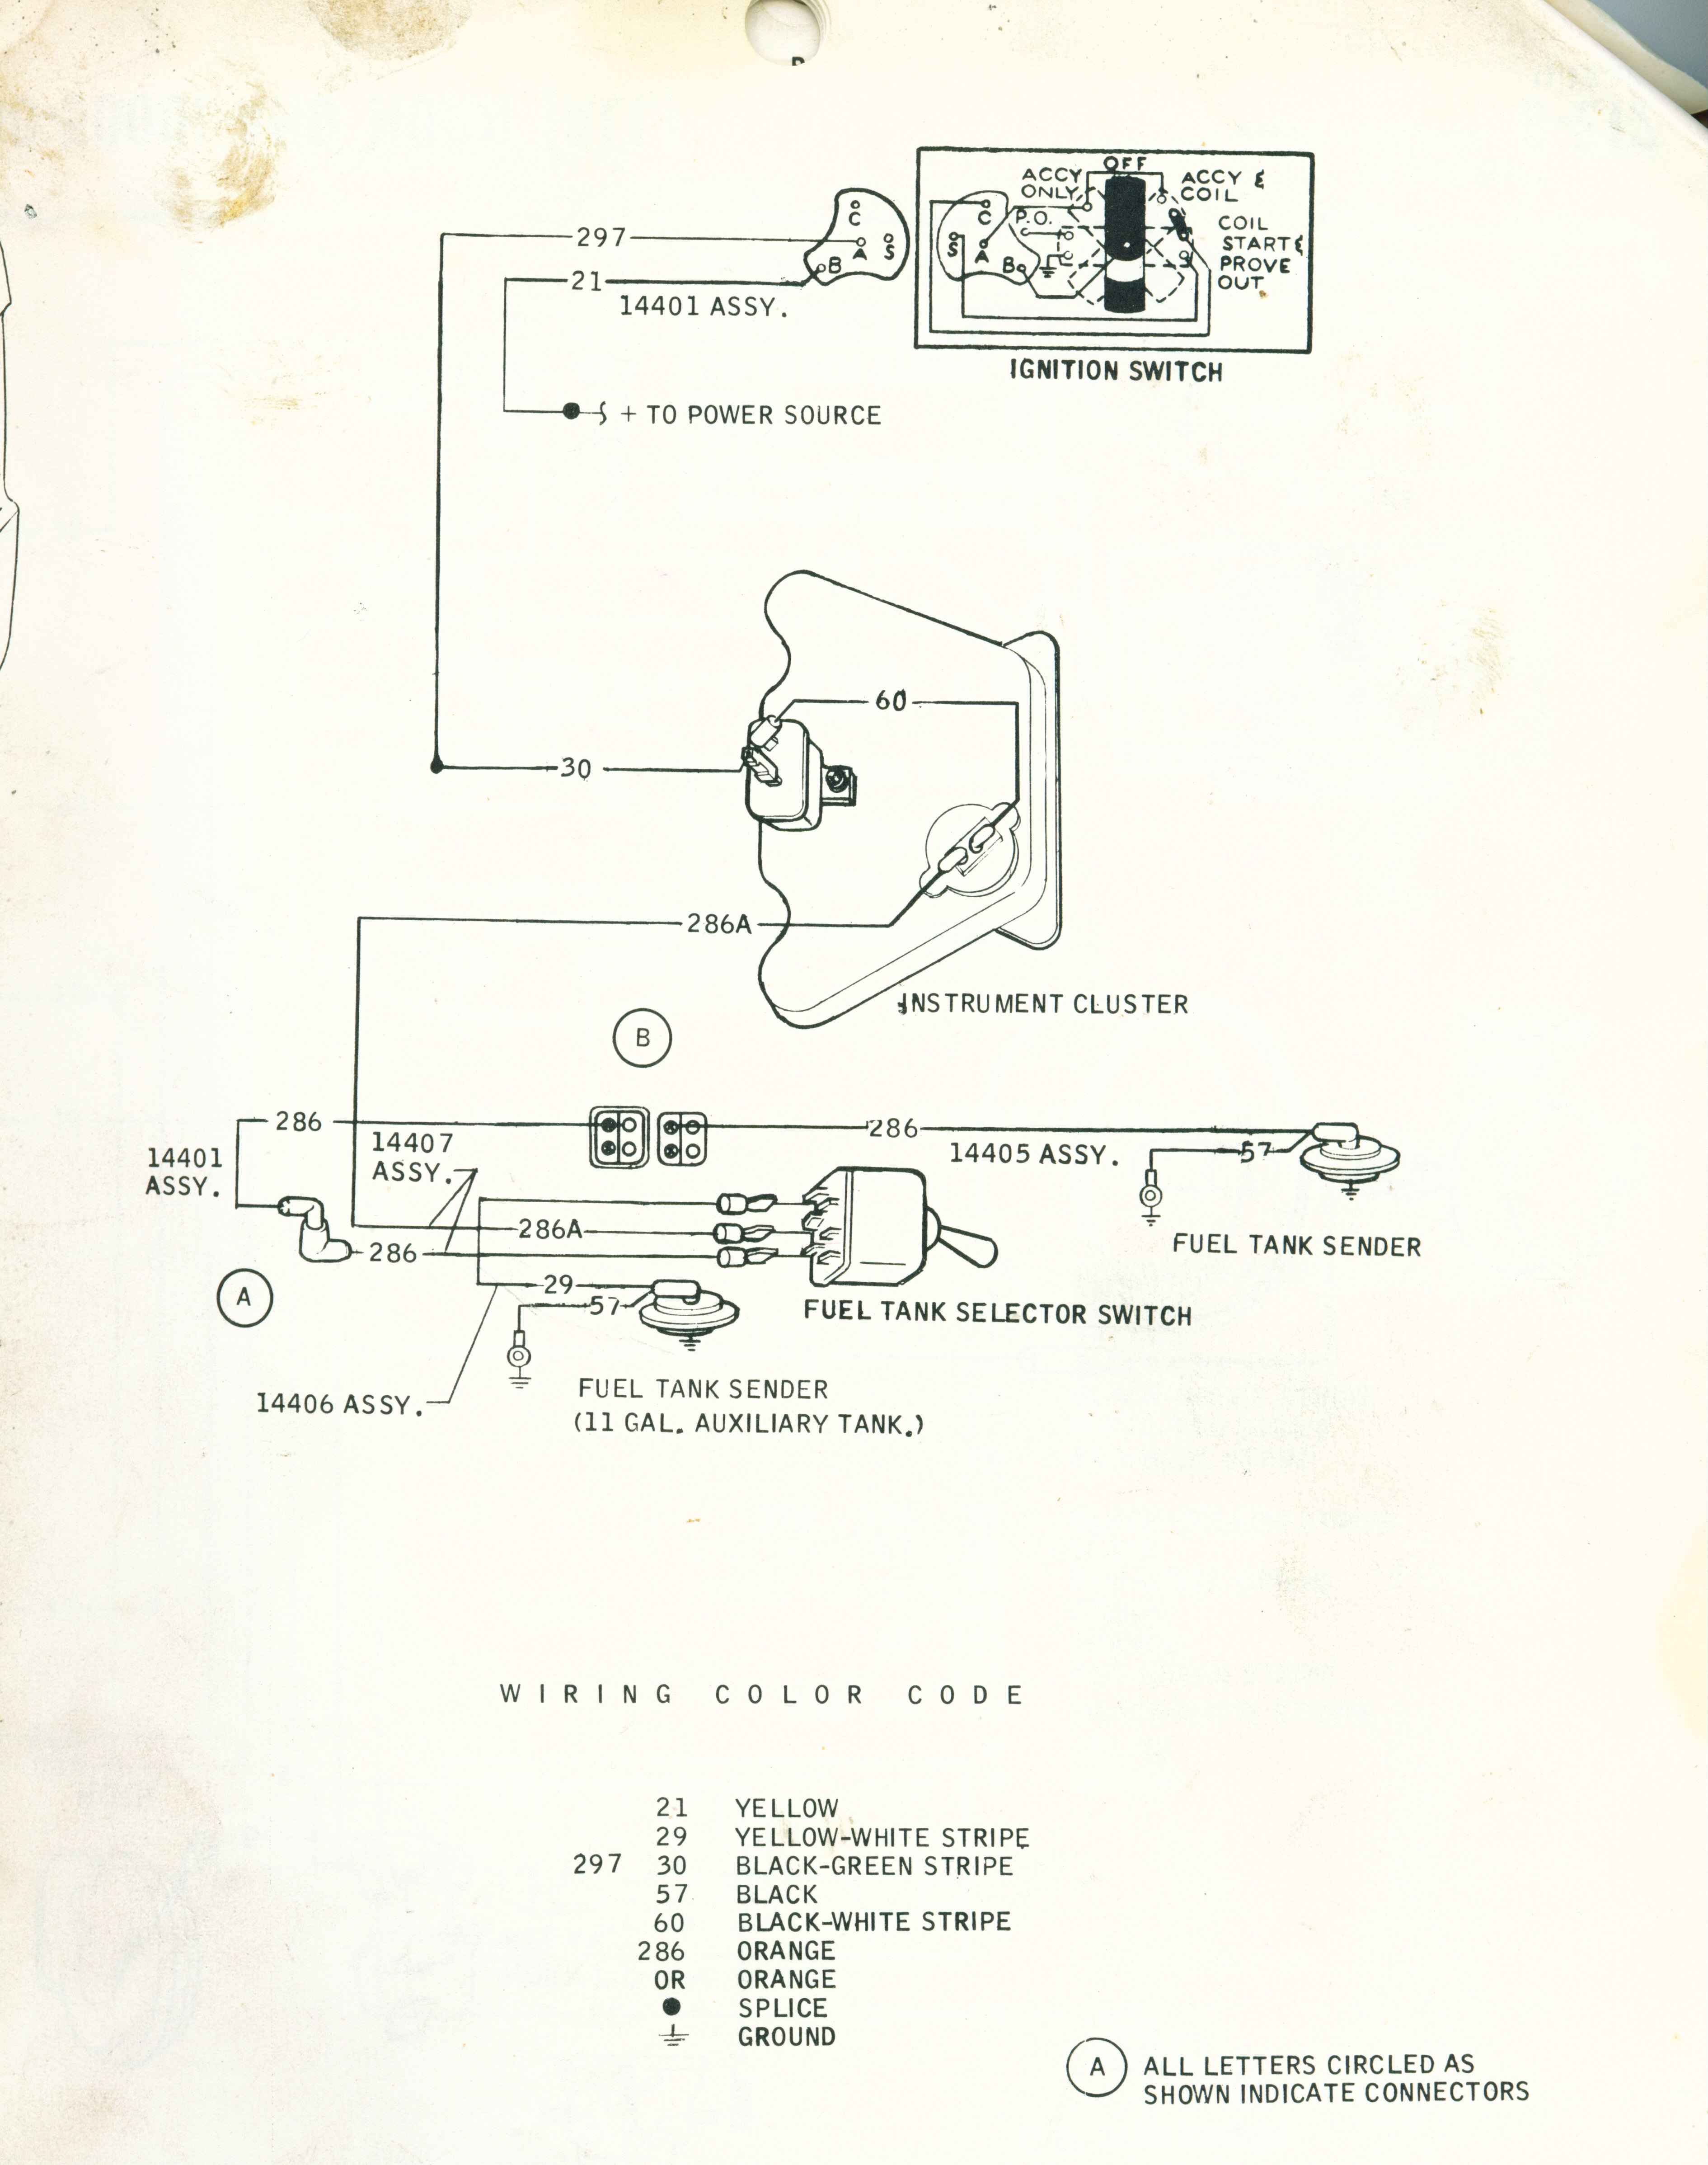 Fuel Gauge Wiring Diagram Chevy from broncozone.com